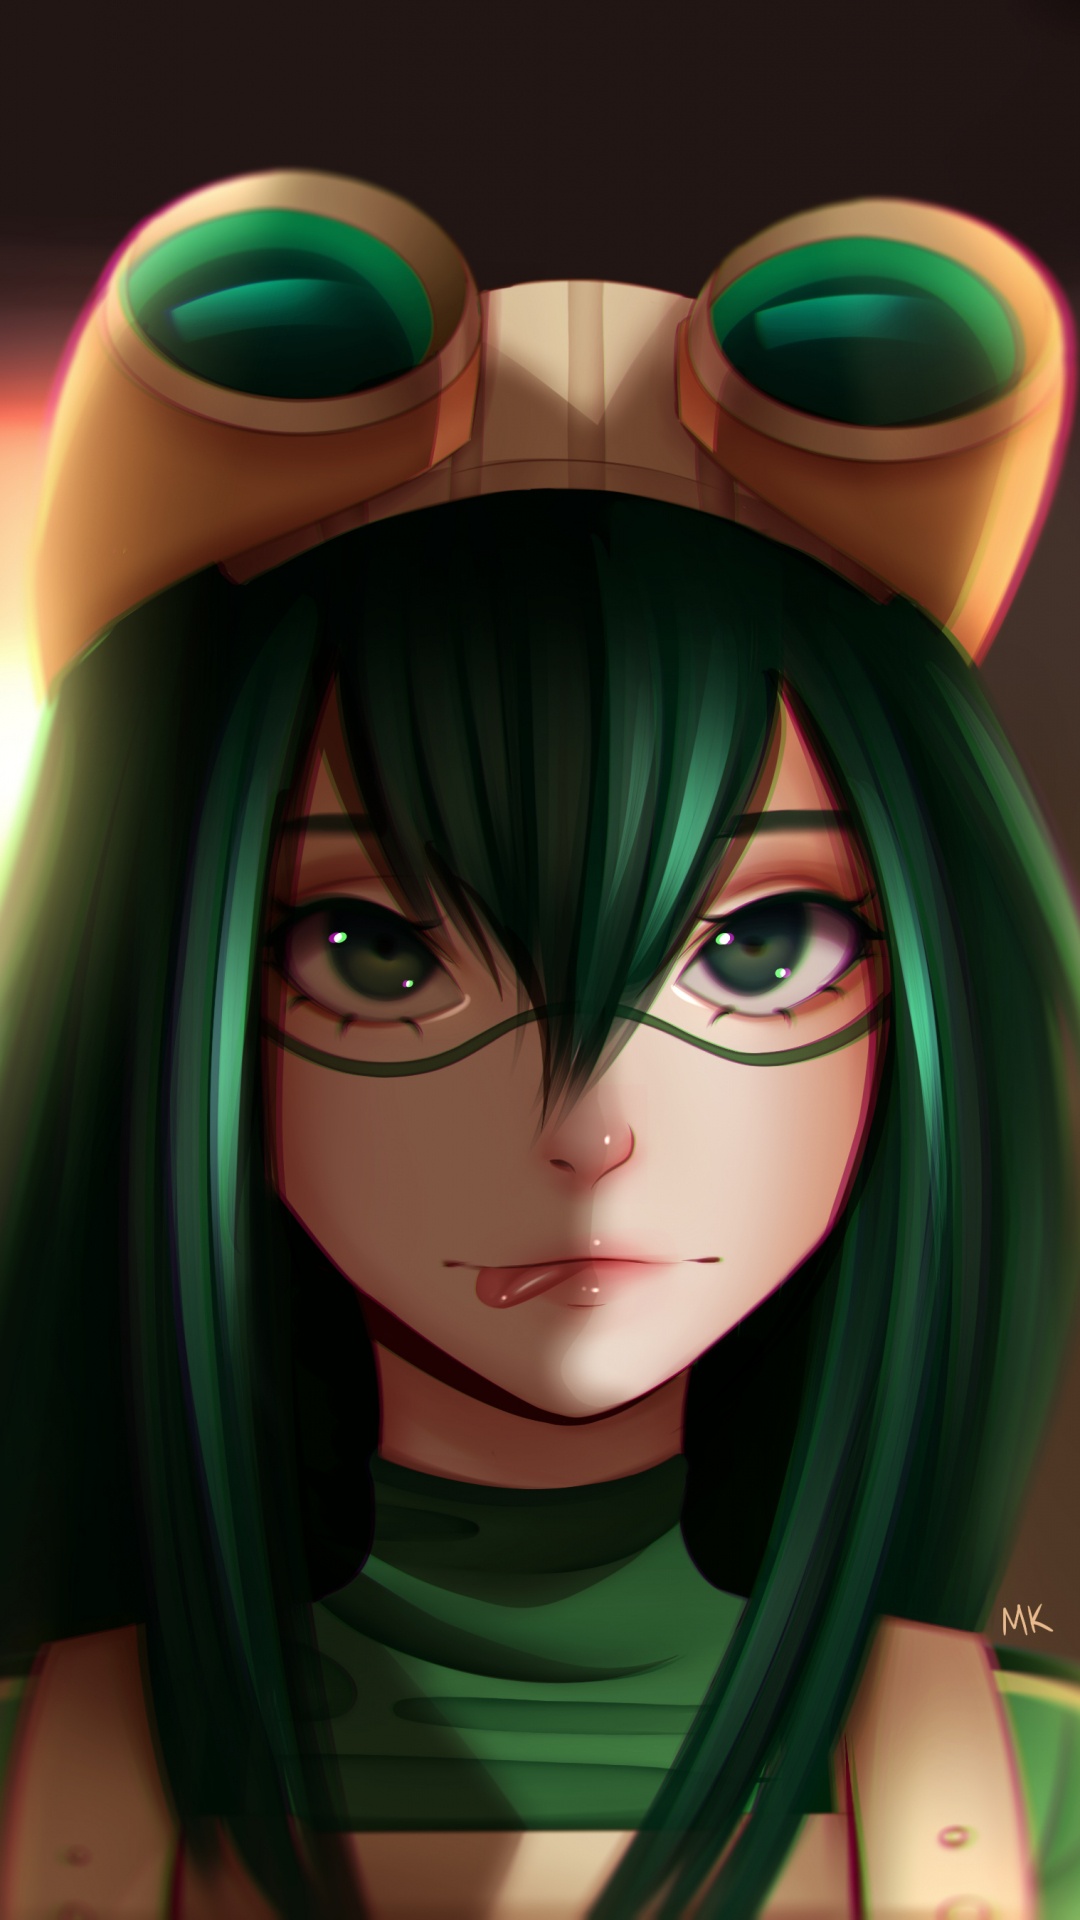 Green Haired Female Anime Character. Wallpaper in 1080x1920 Resolution